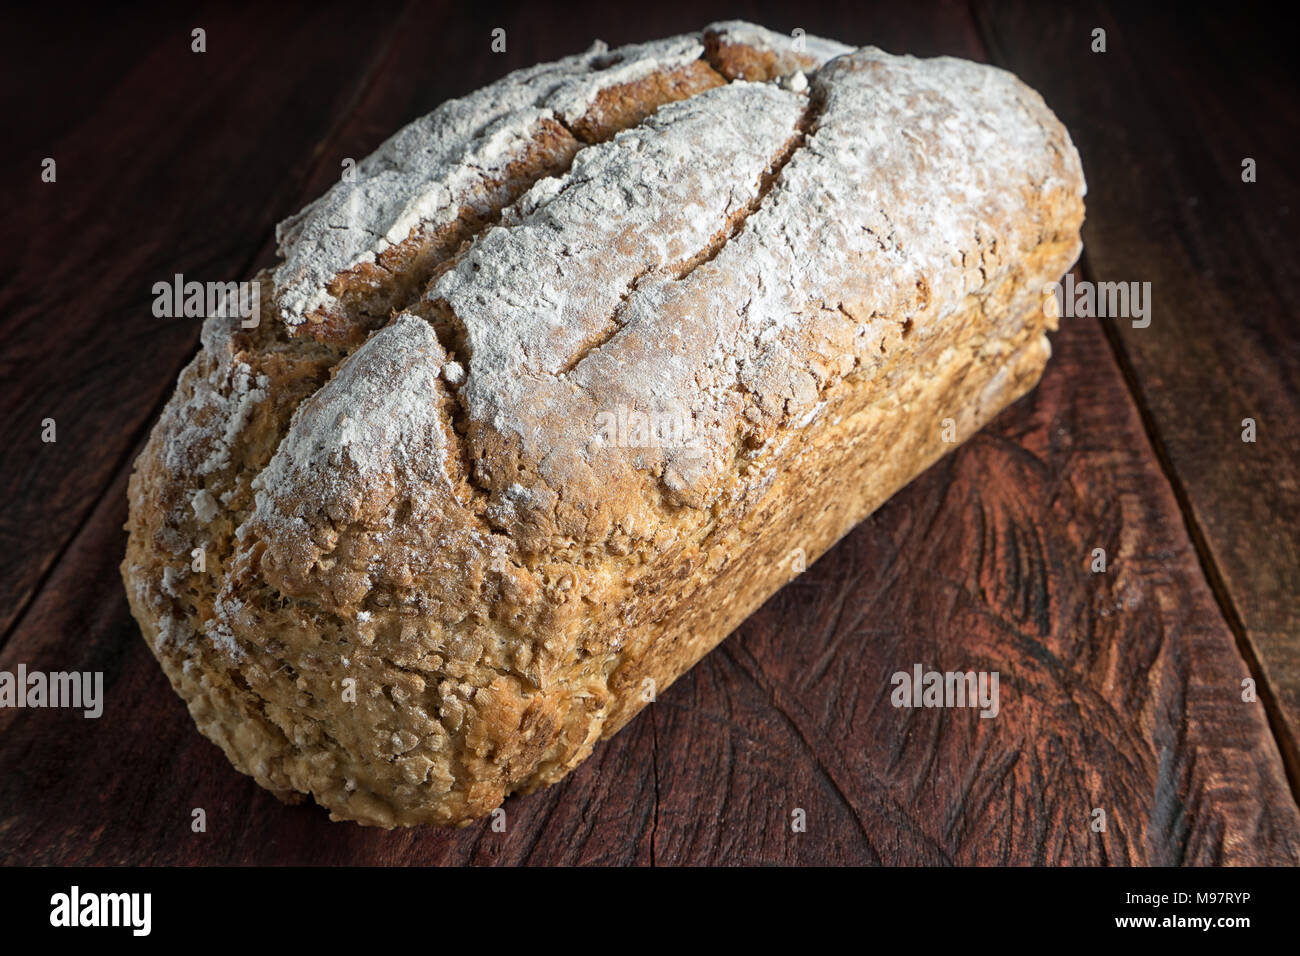 loaf of artisan bread on rustic wooden background Stock Photo